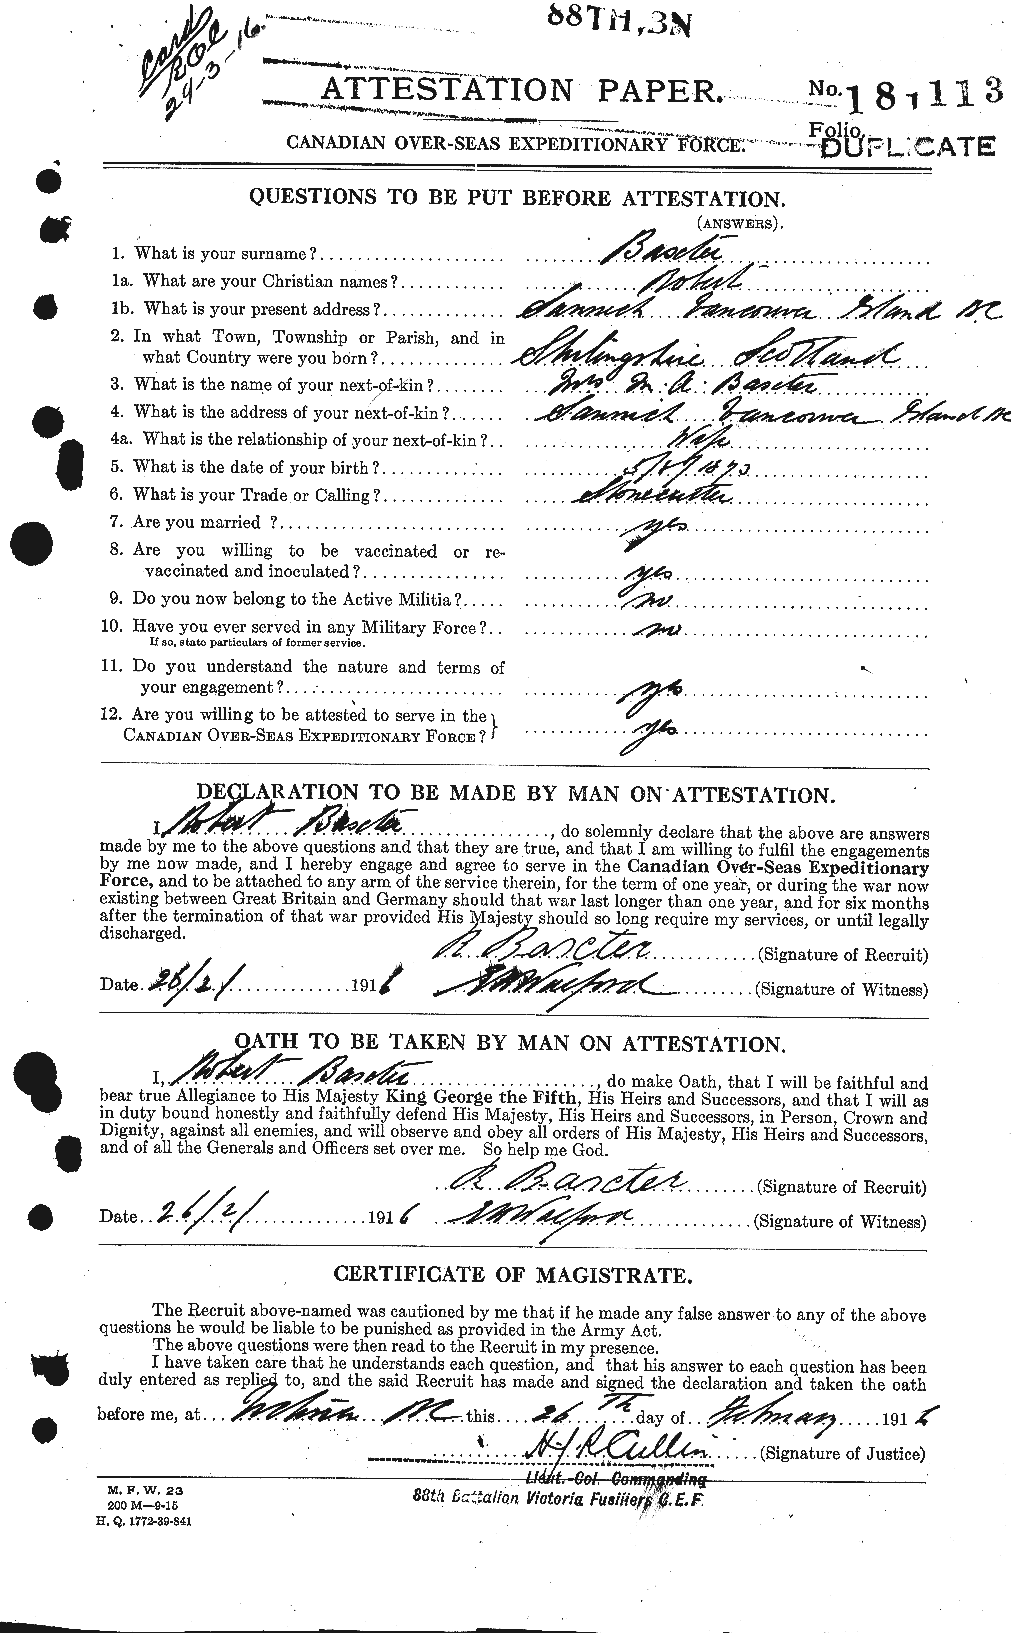 Personnel Records of the First World War - CEF 221244a